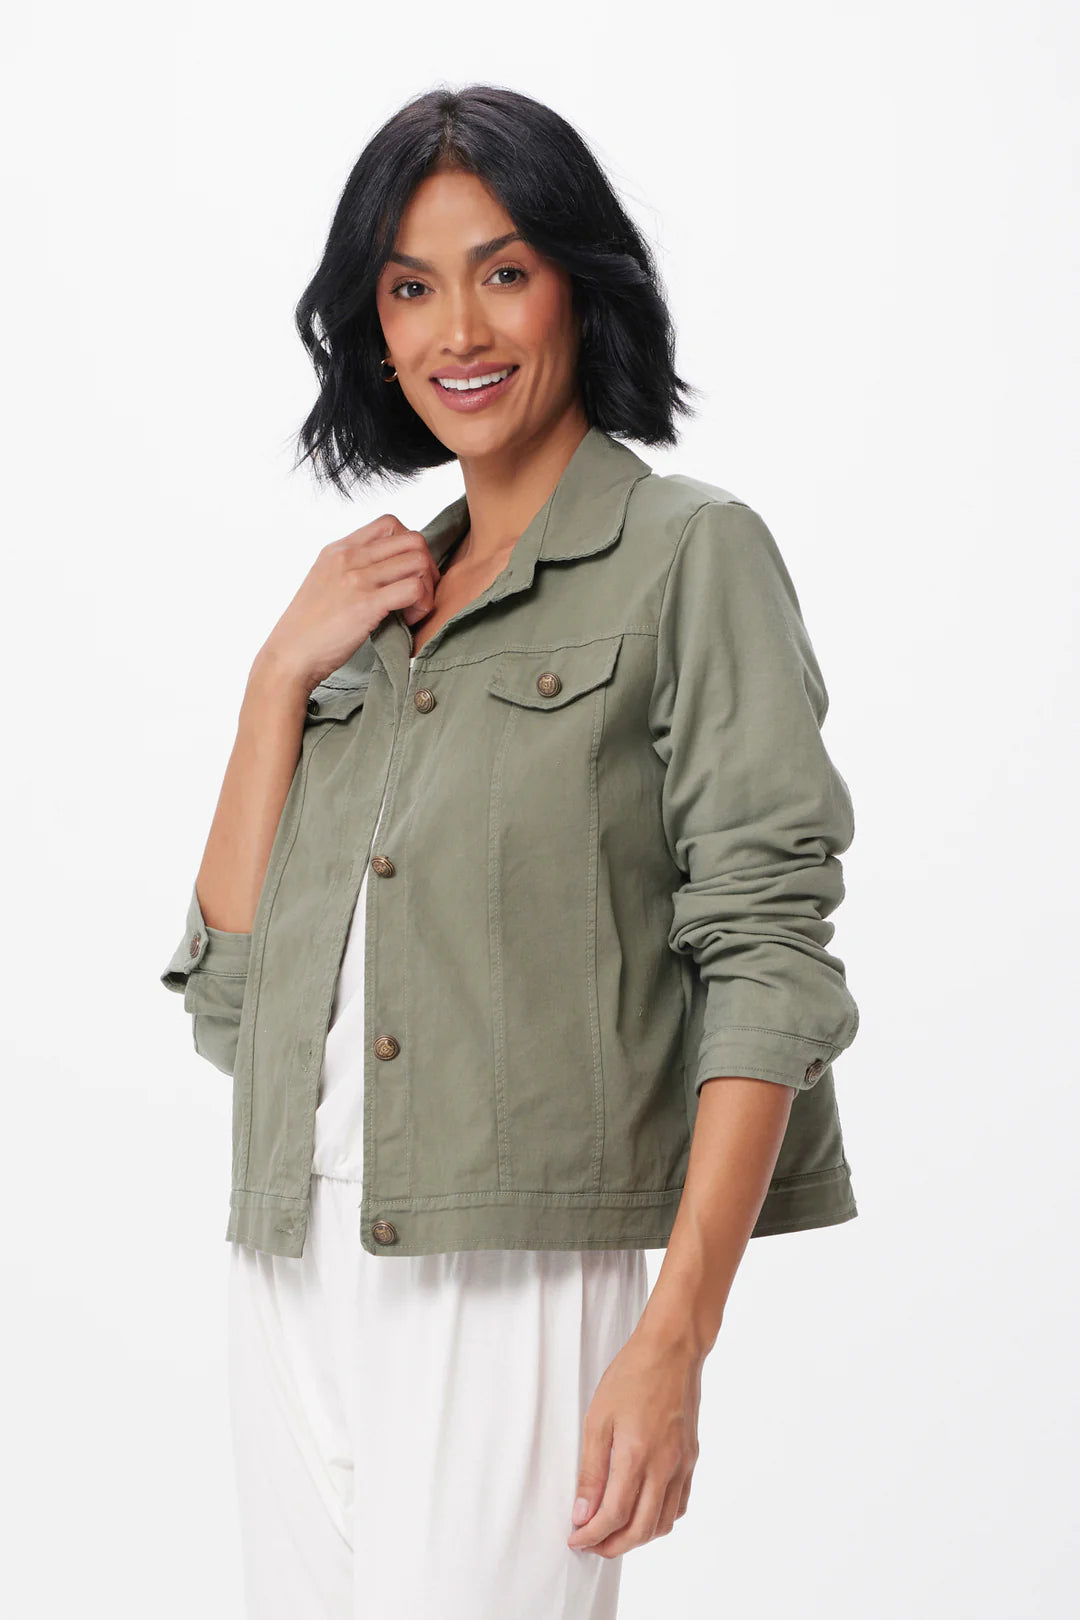 This military-inspired jacket from Suzyd radiates vintage vibes. The&nbsp;design has a distinctive structure with a soft jersey back, faux pockets and a frayed hemline. Perfect for Spring layering, day or night, it’s up to you. Fit is boxy but true to size.